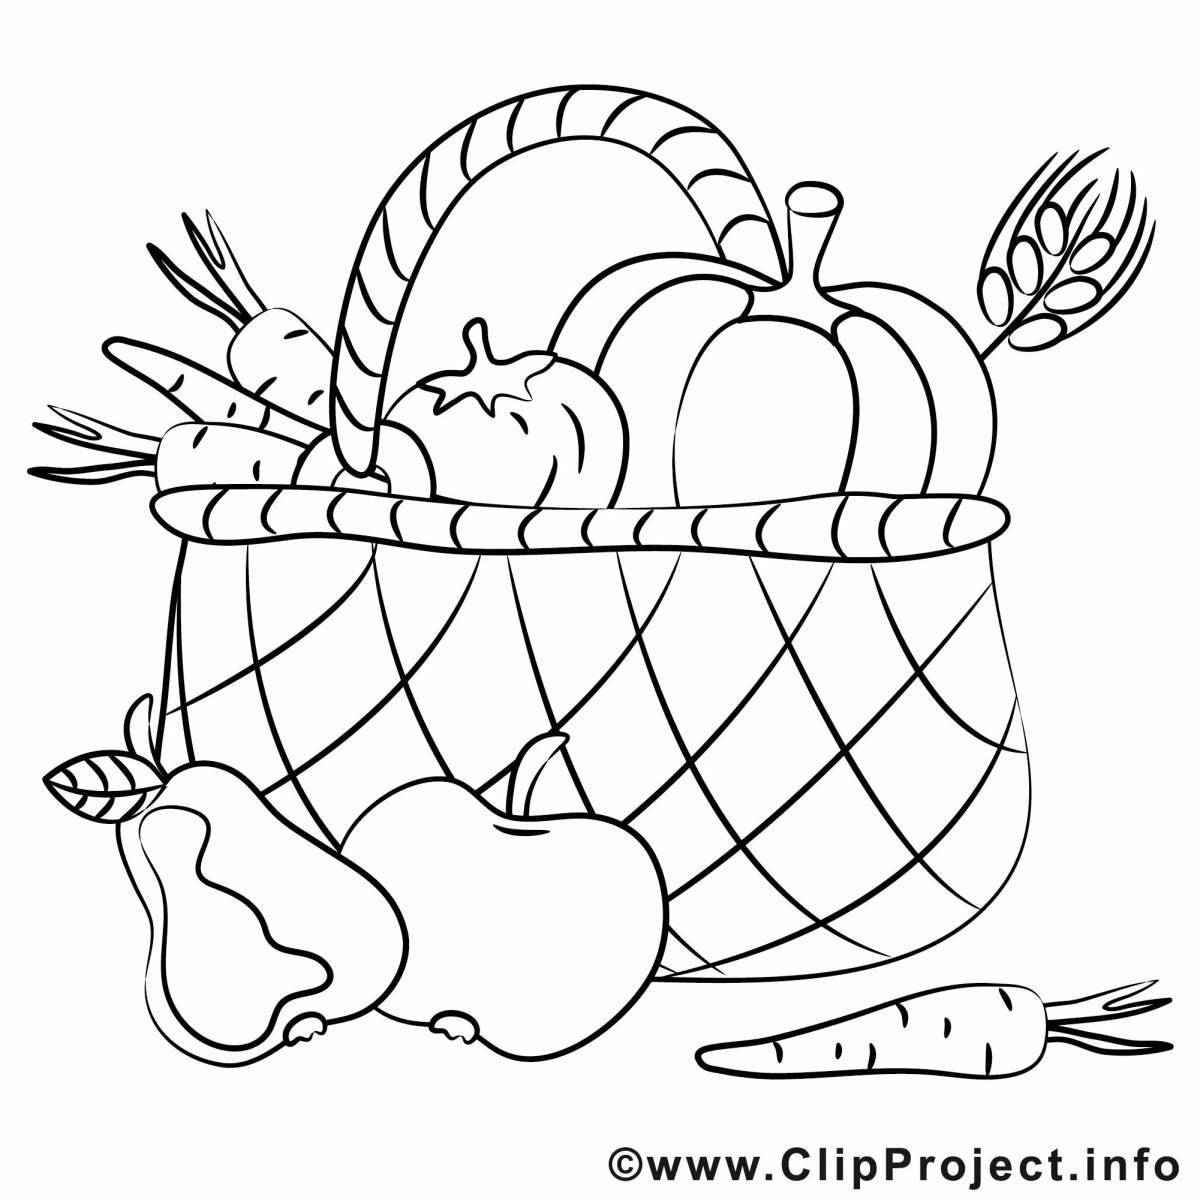 Animated fruit basket coloring page for kids